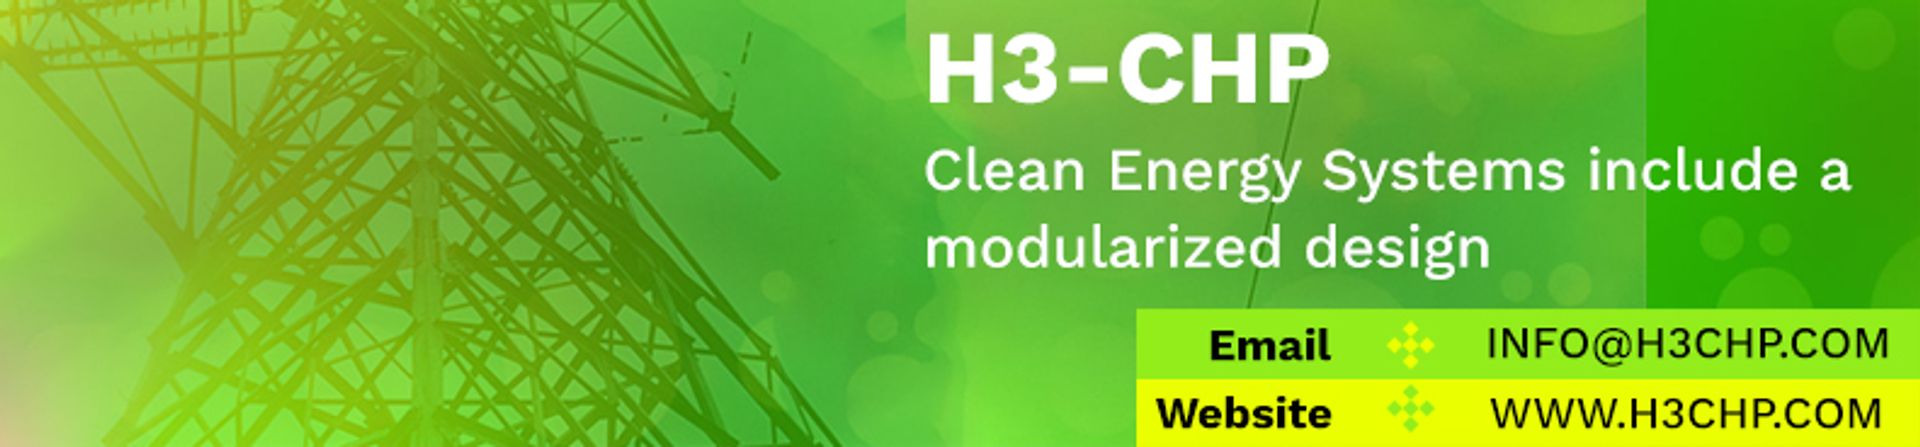 H3-CHP Clean Energy Systems